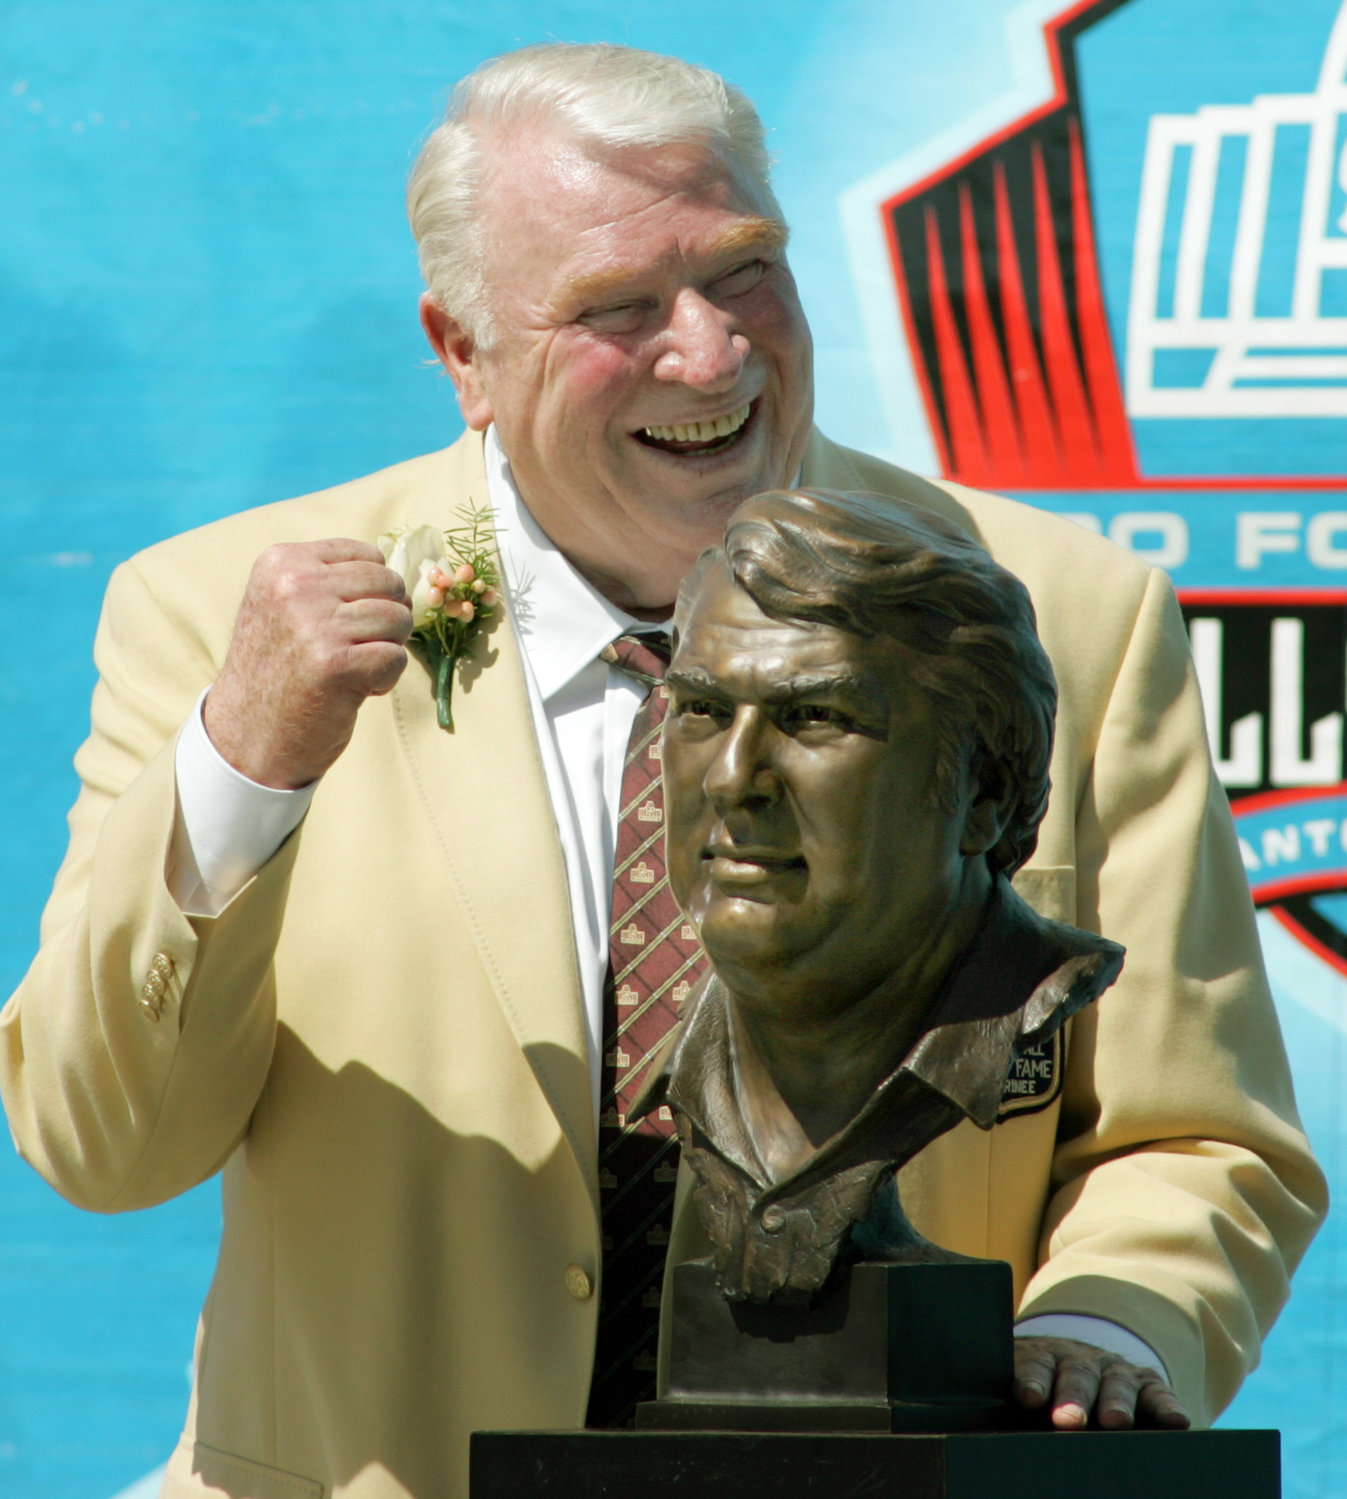 John Madden stands with his bust at the Pro Football Hall of Fame induction ceremony on Saturday, August 5, 2006, in Canton, Ohio. (Ron Jenkins/Fort Worth Star-Telegram/TNS)